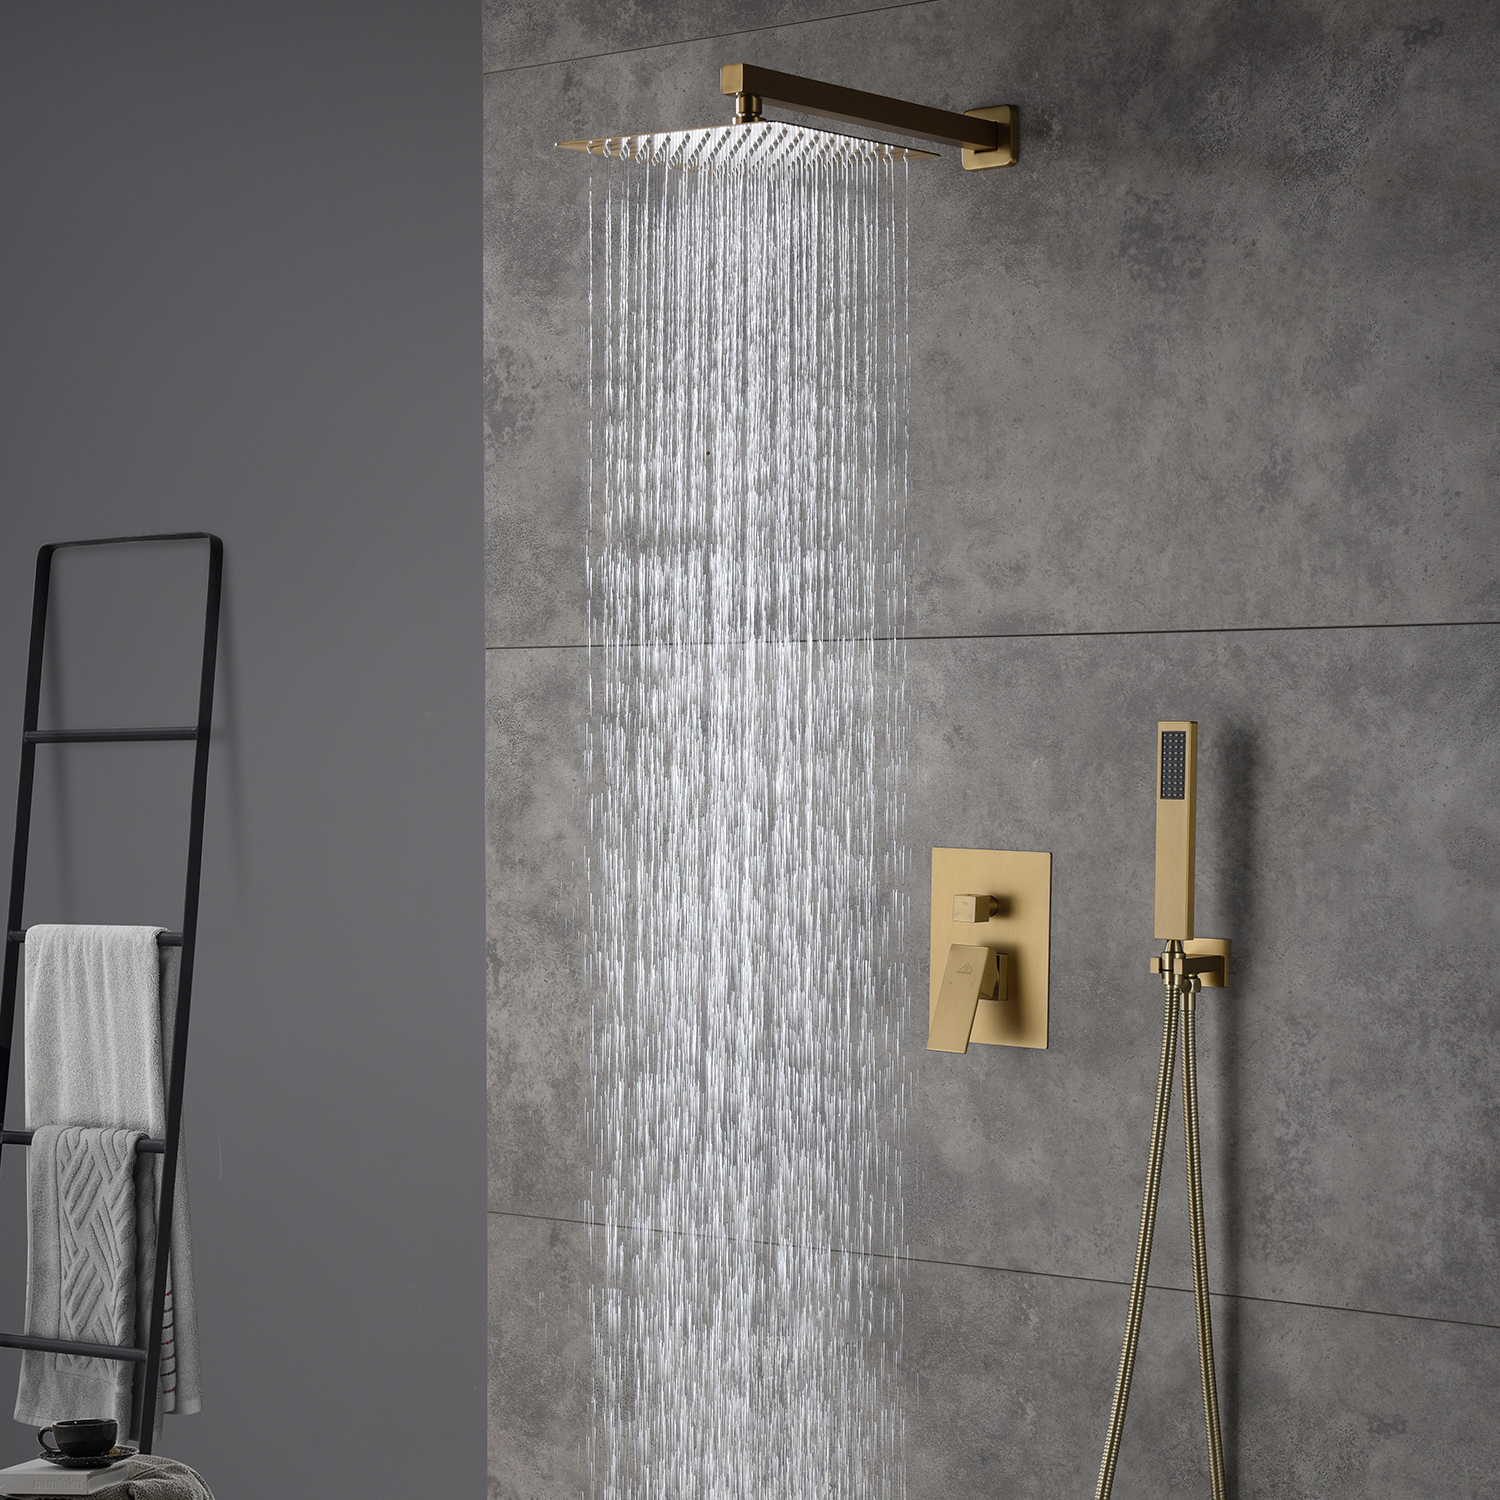 Casainc 2 Function 10" Wall Mounted Dual Shower Heads Shower System In Brush gold-CASAINC